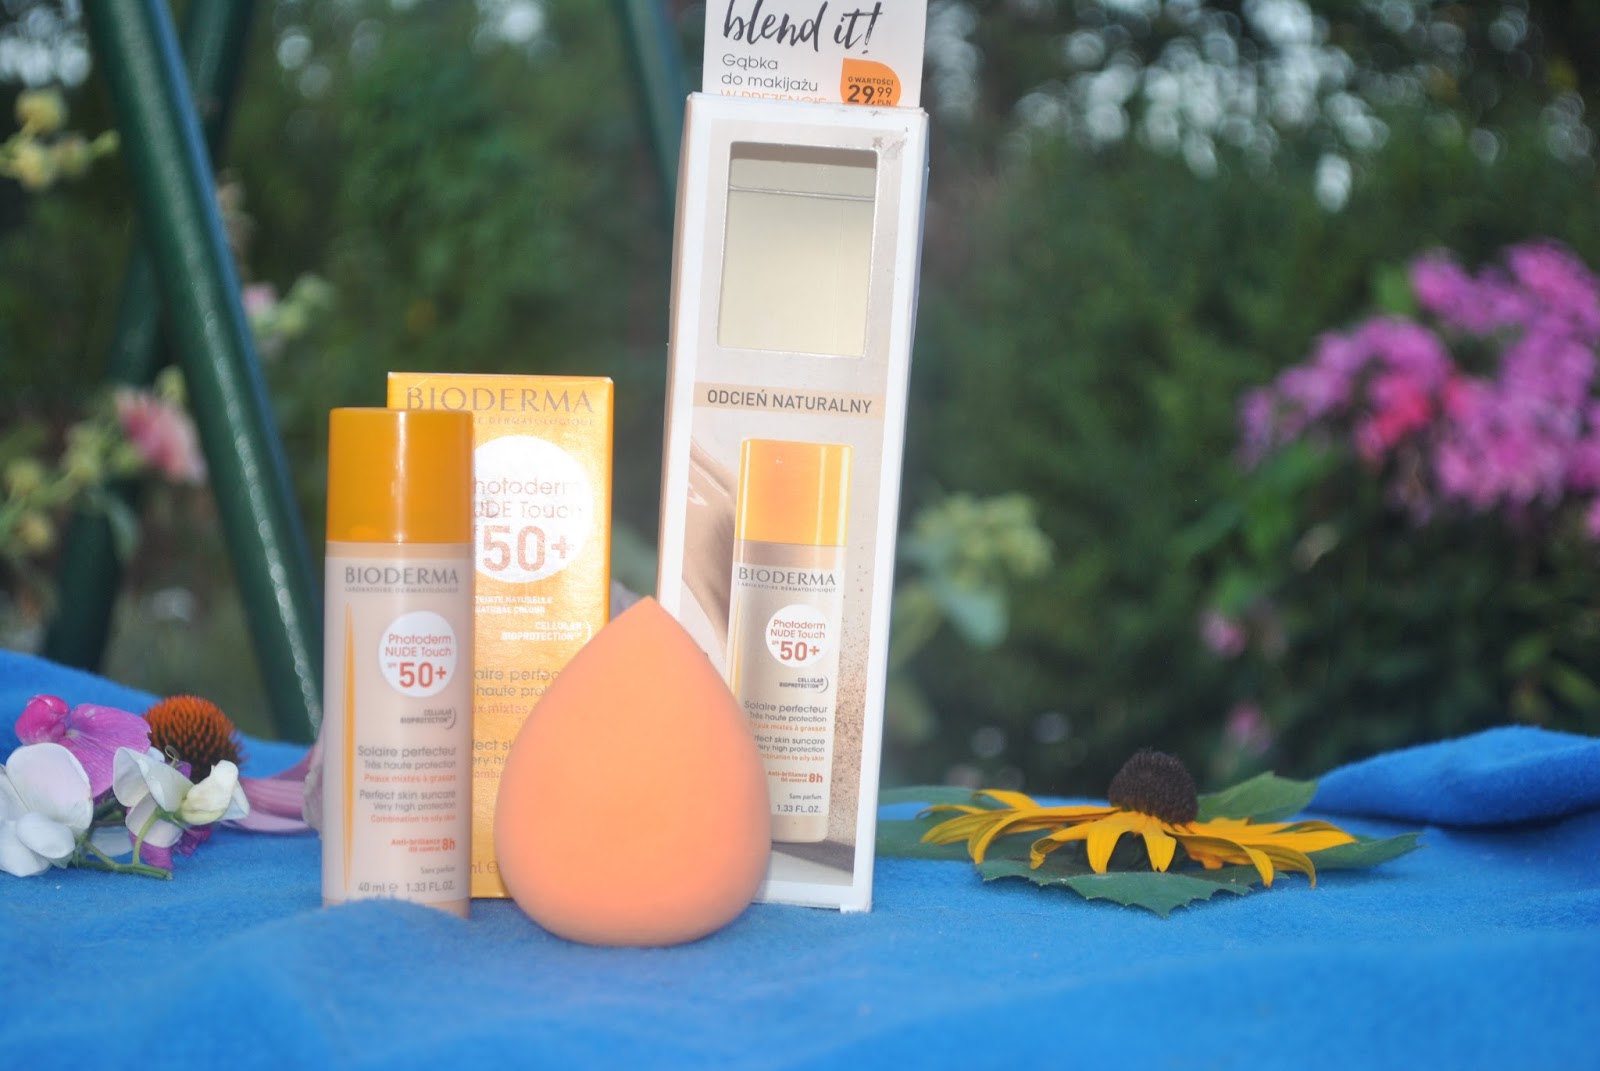 nude-touch-spf-50-bioderma-photoderm